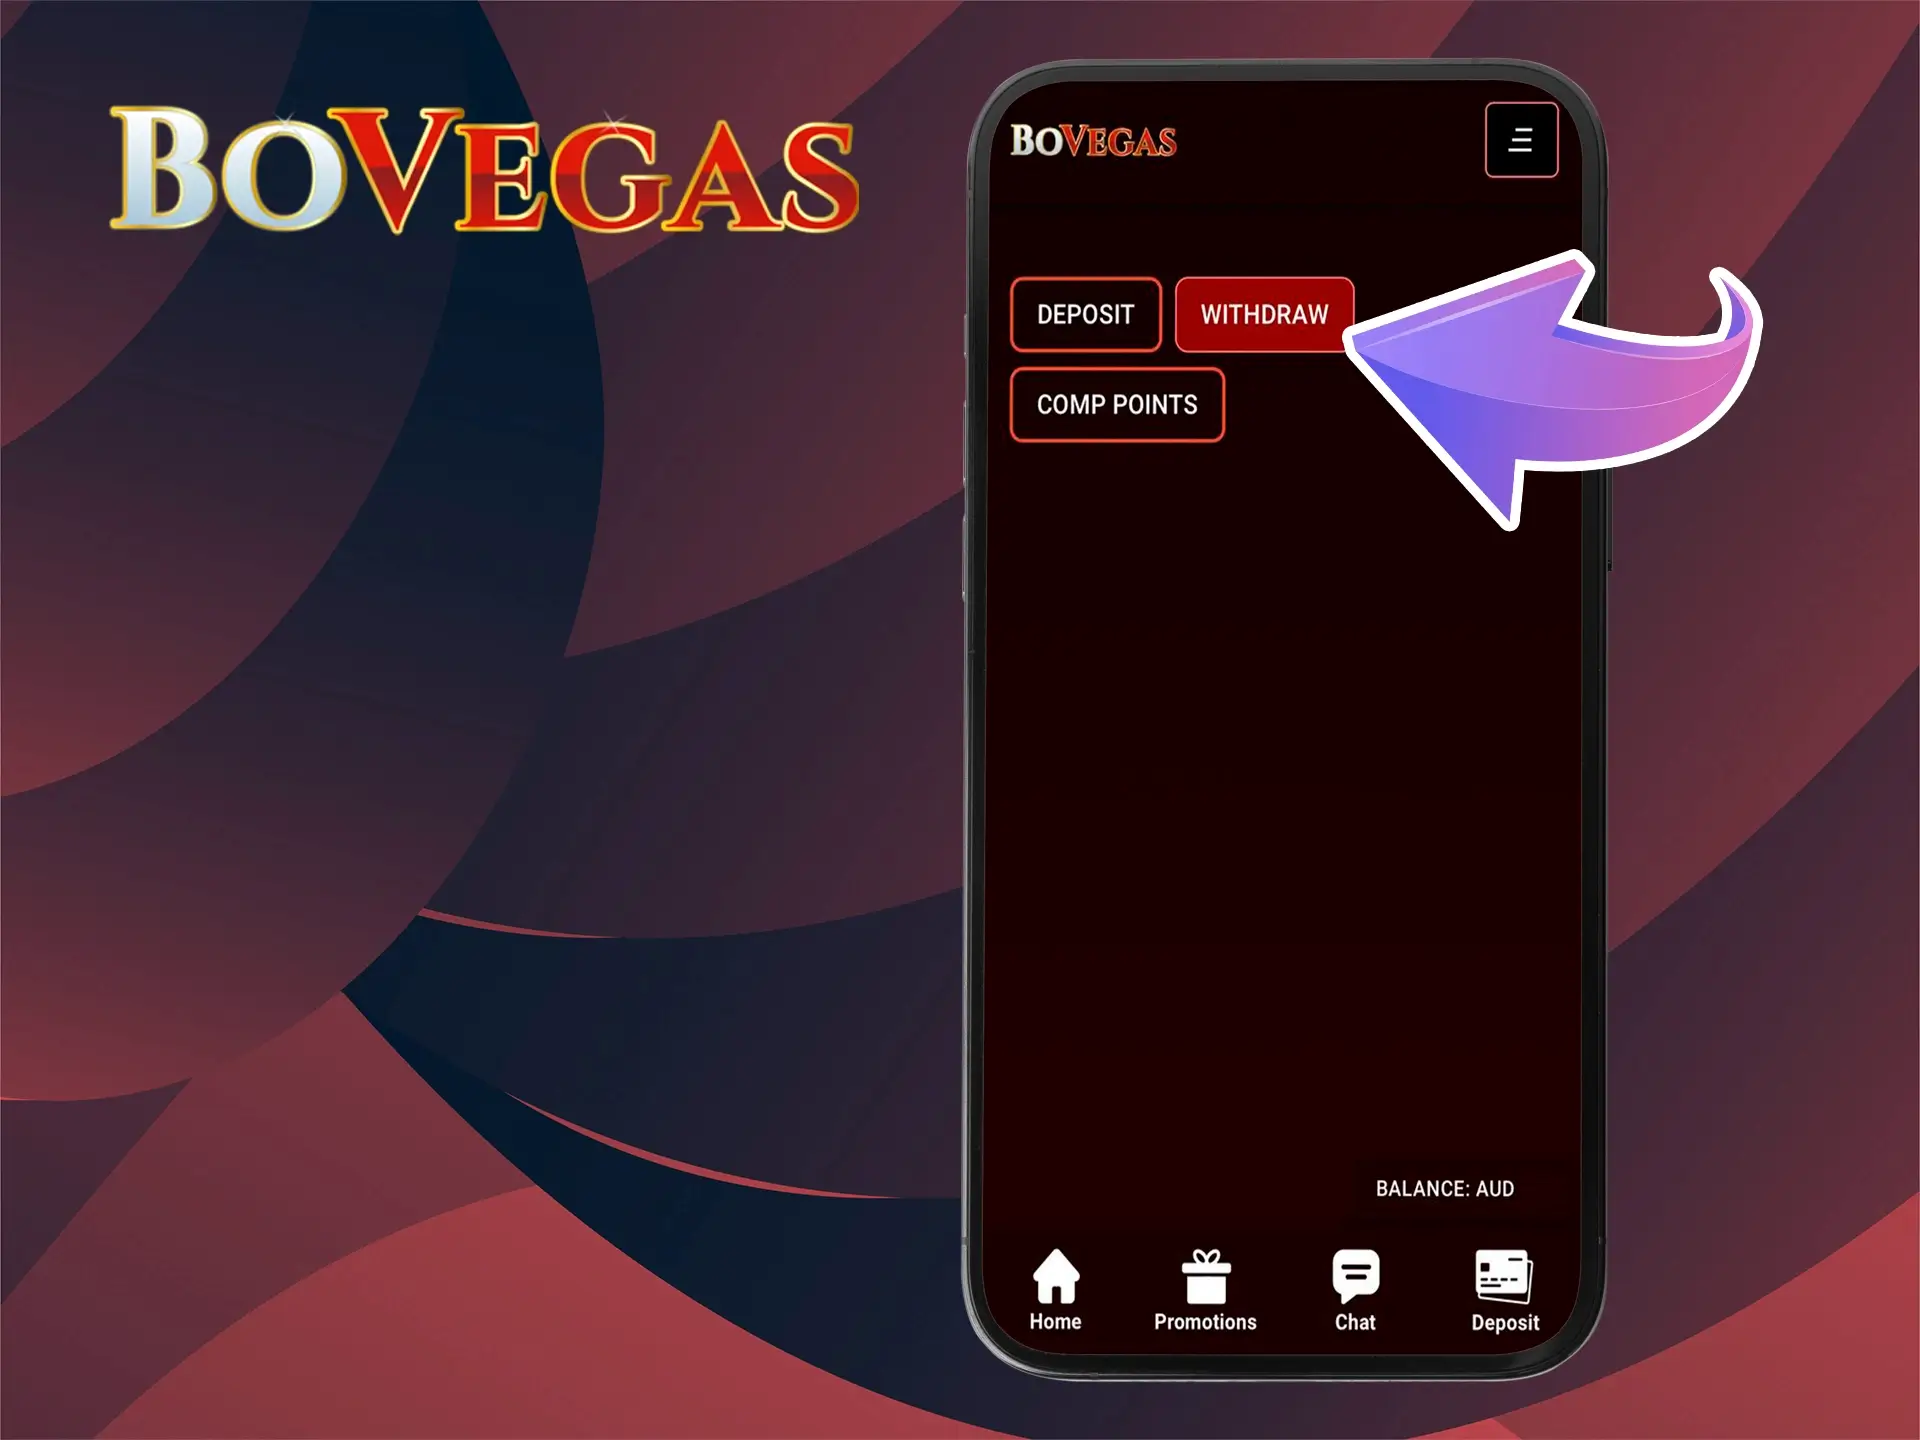 In the BoVegas menu, click on the withdrawal button.